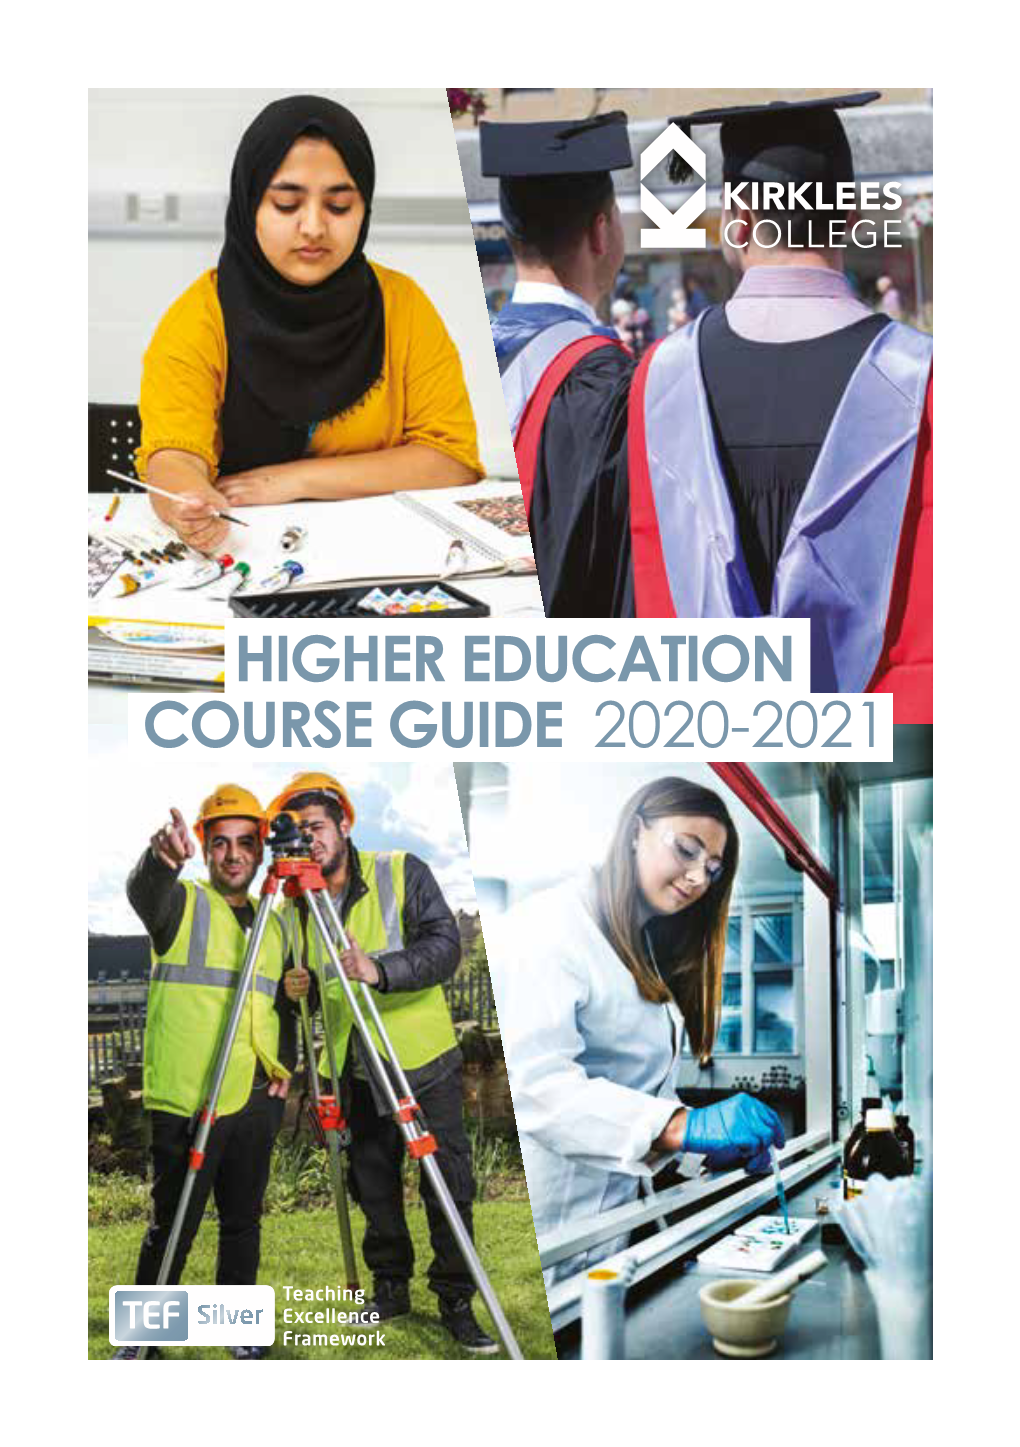 Higher Education Course Guide 2020-2021 Higher Education Courses with Kirklees College